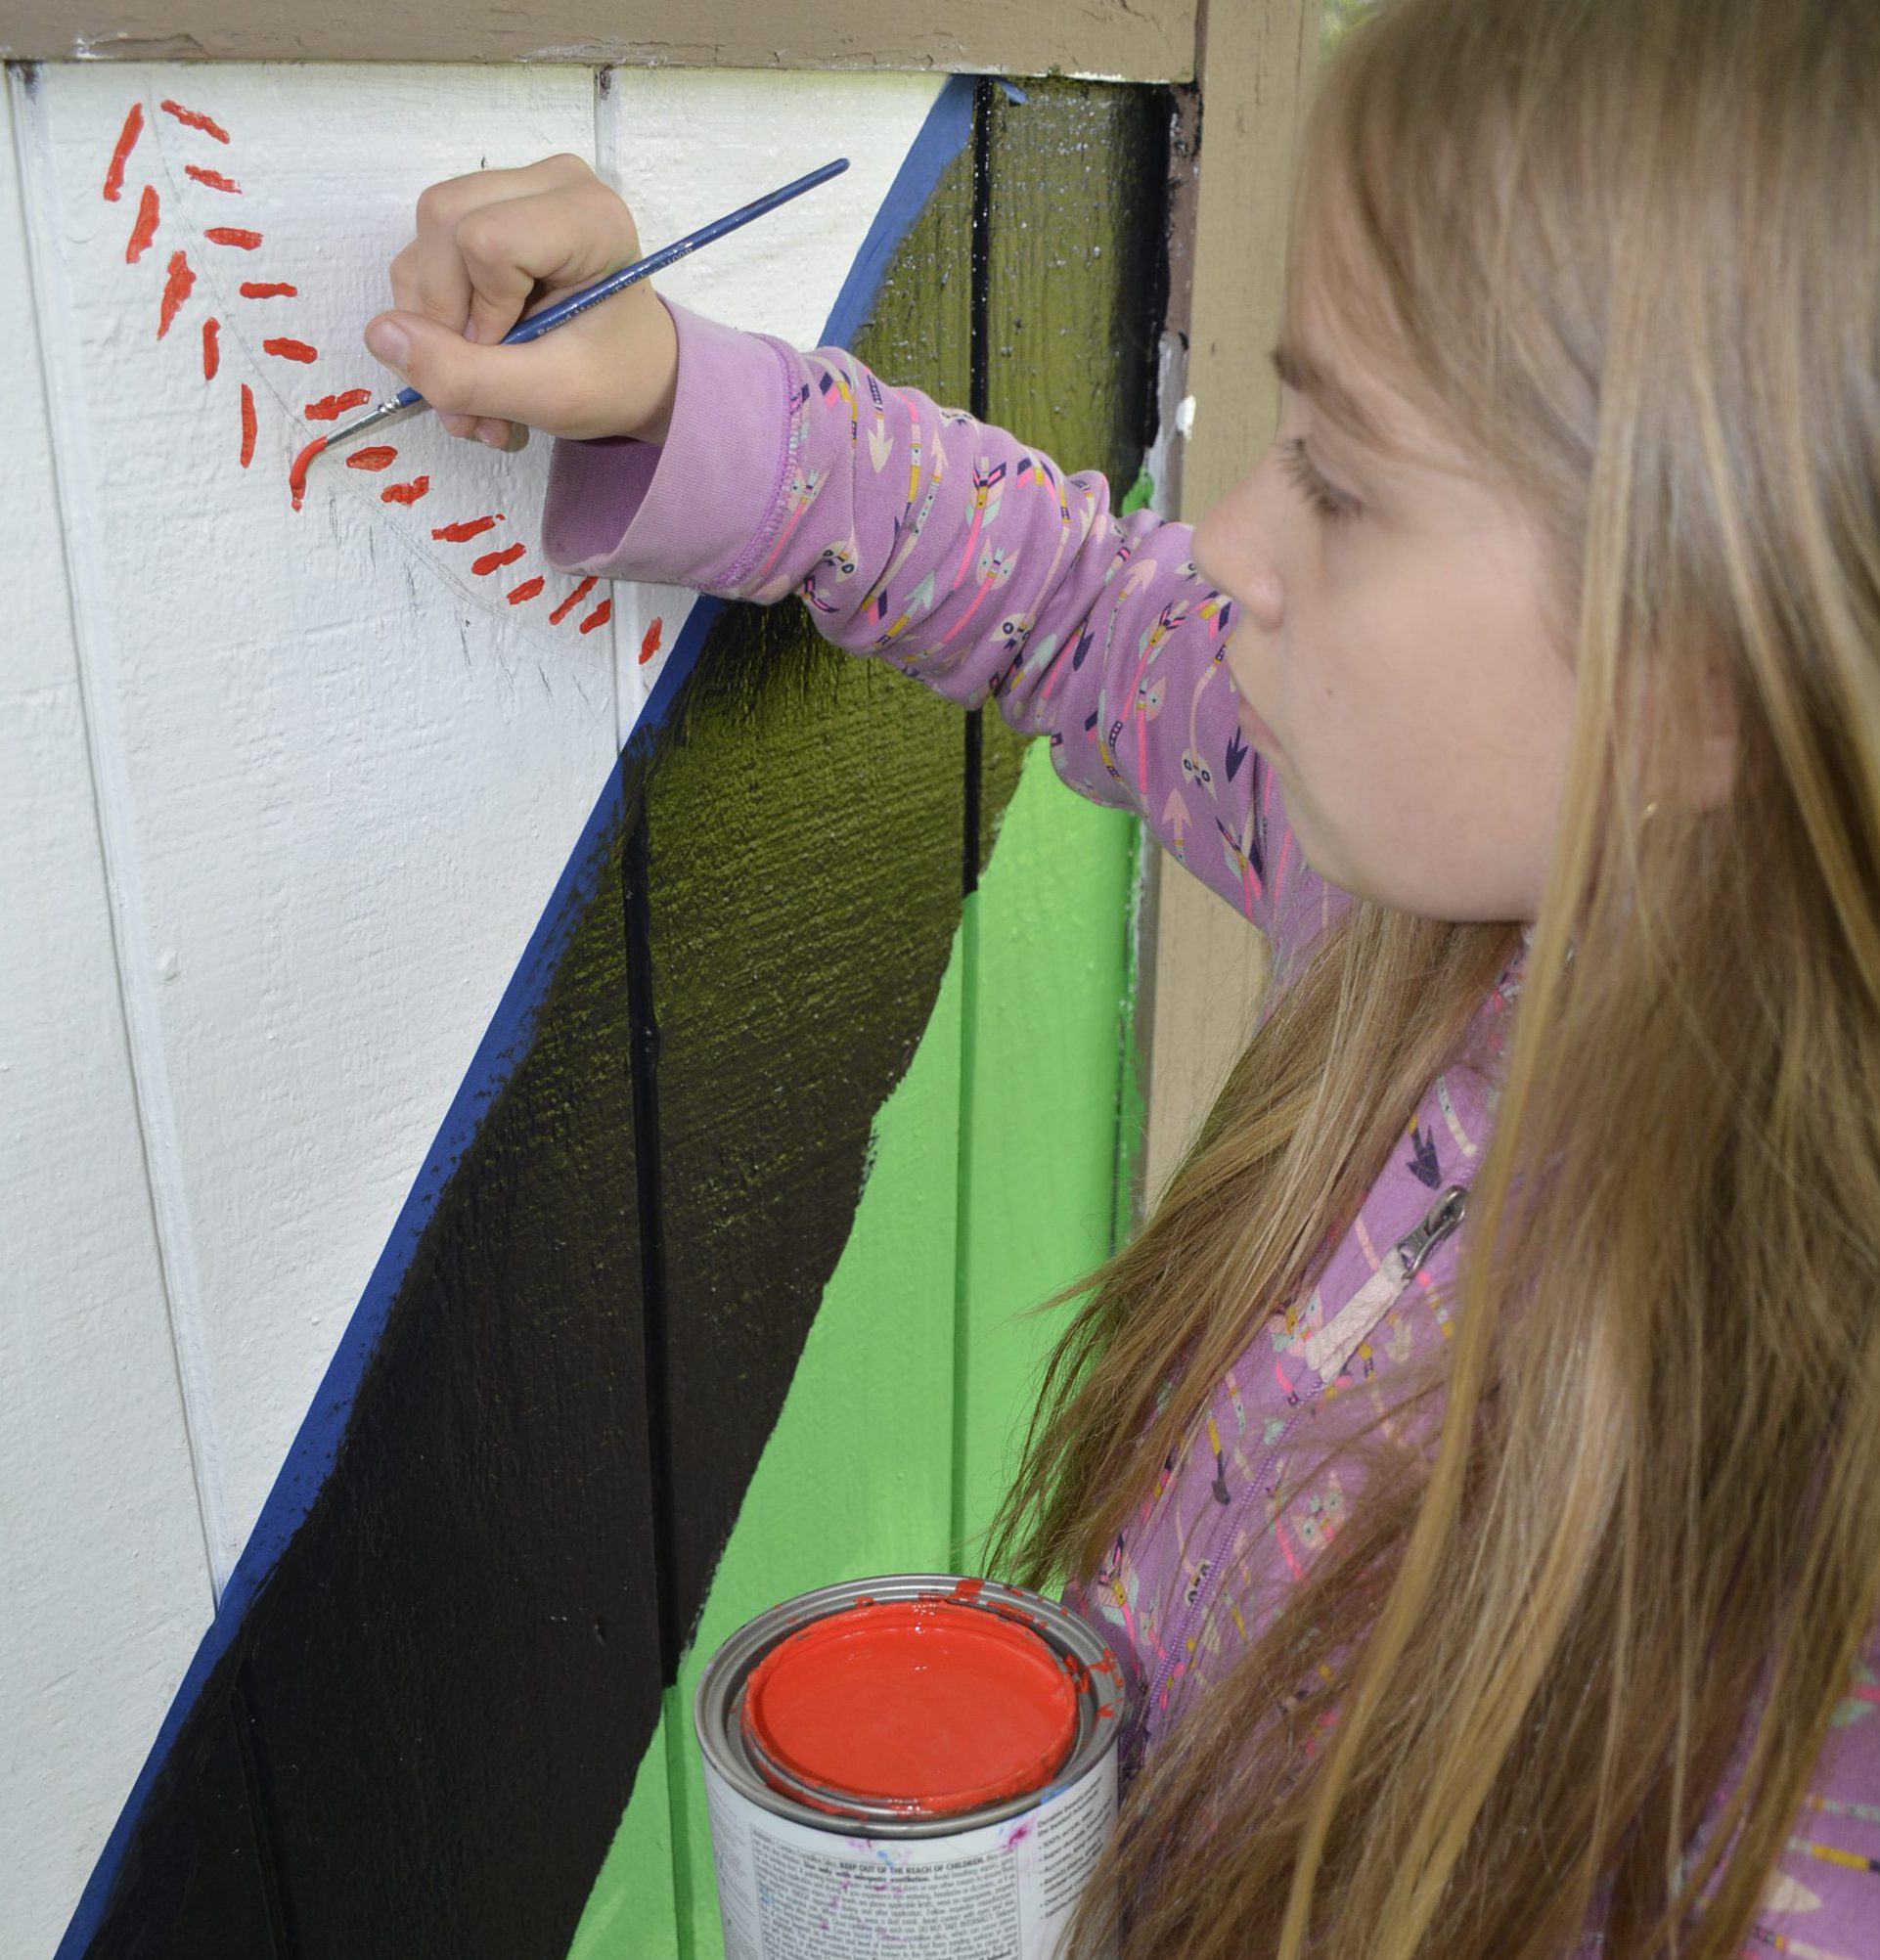 JMS student adding detail to Hathaway park mural